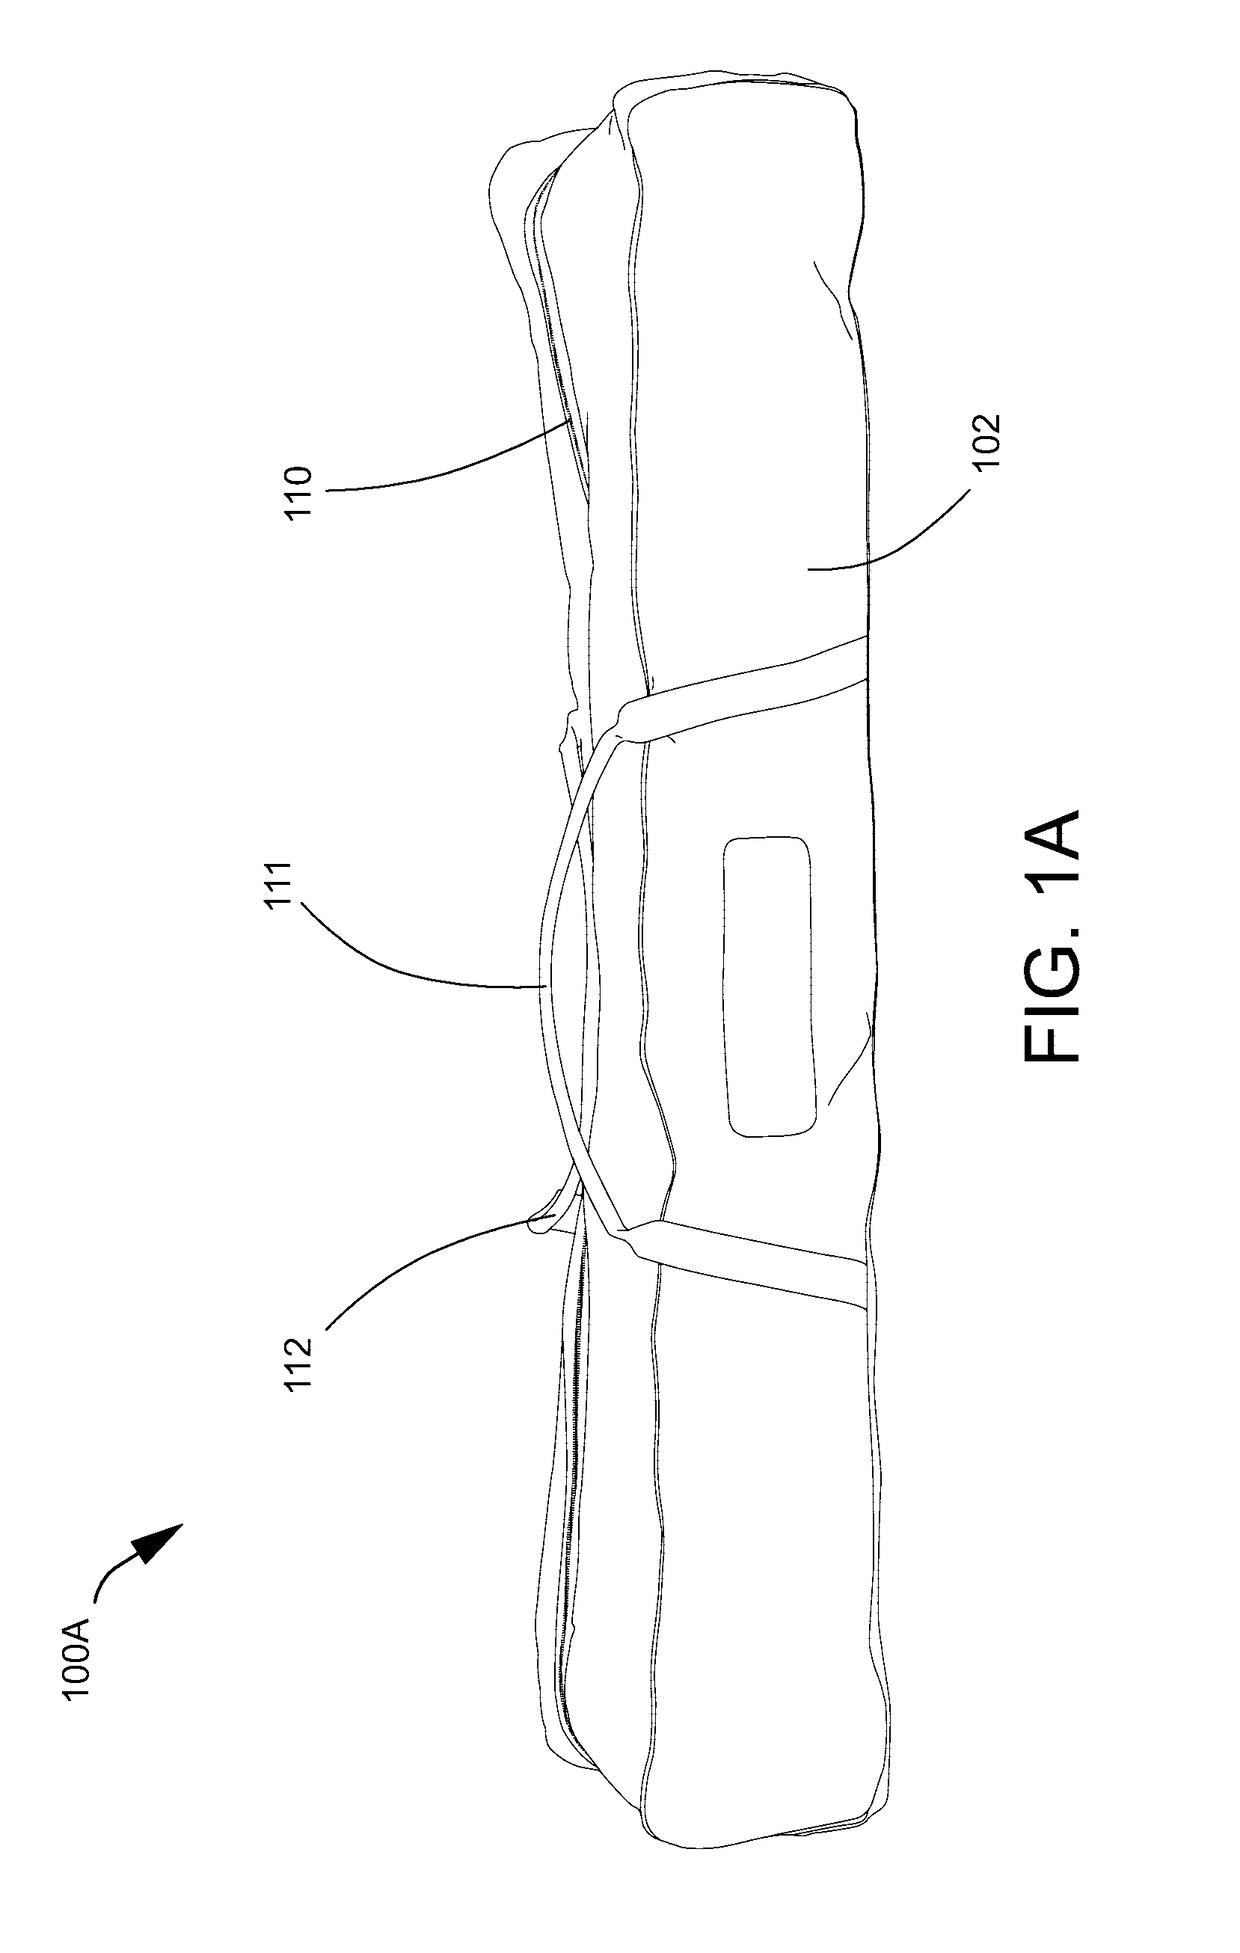 In-building-communication apparatus and method